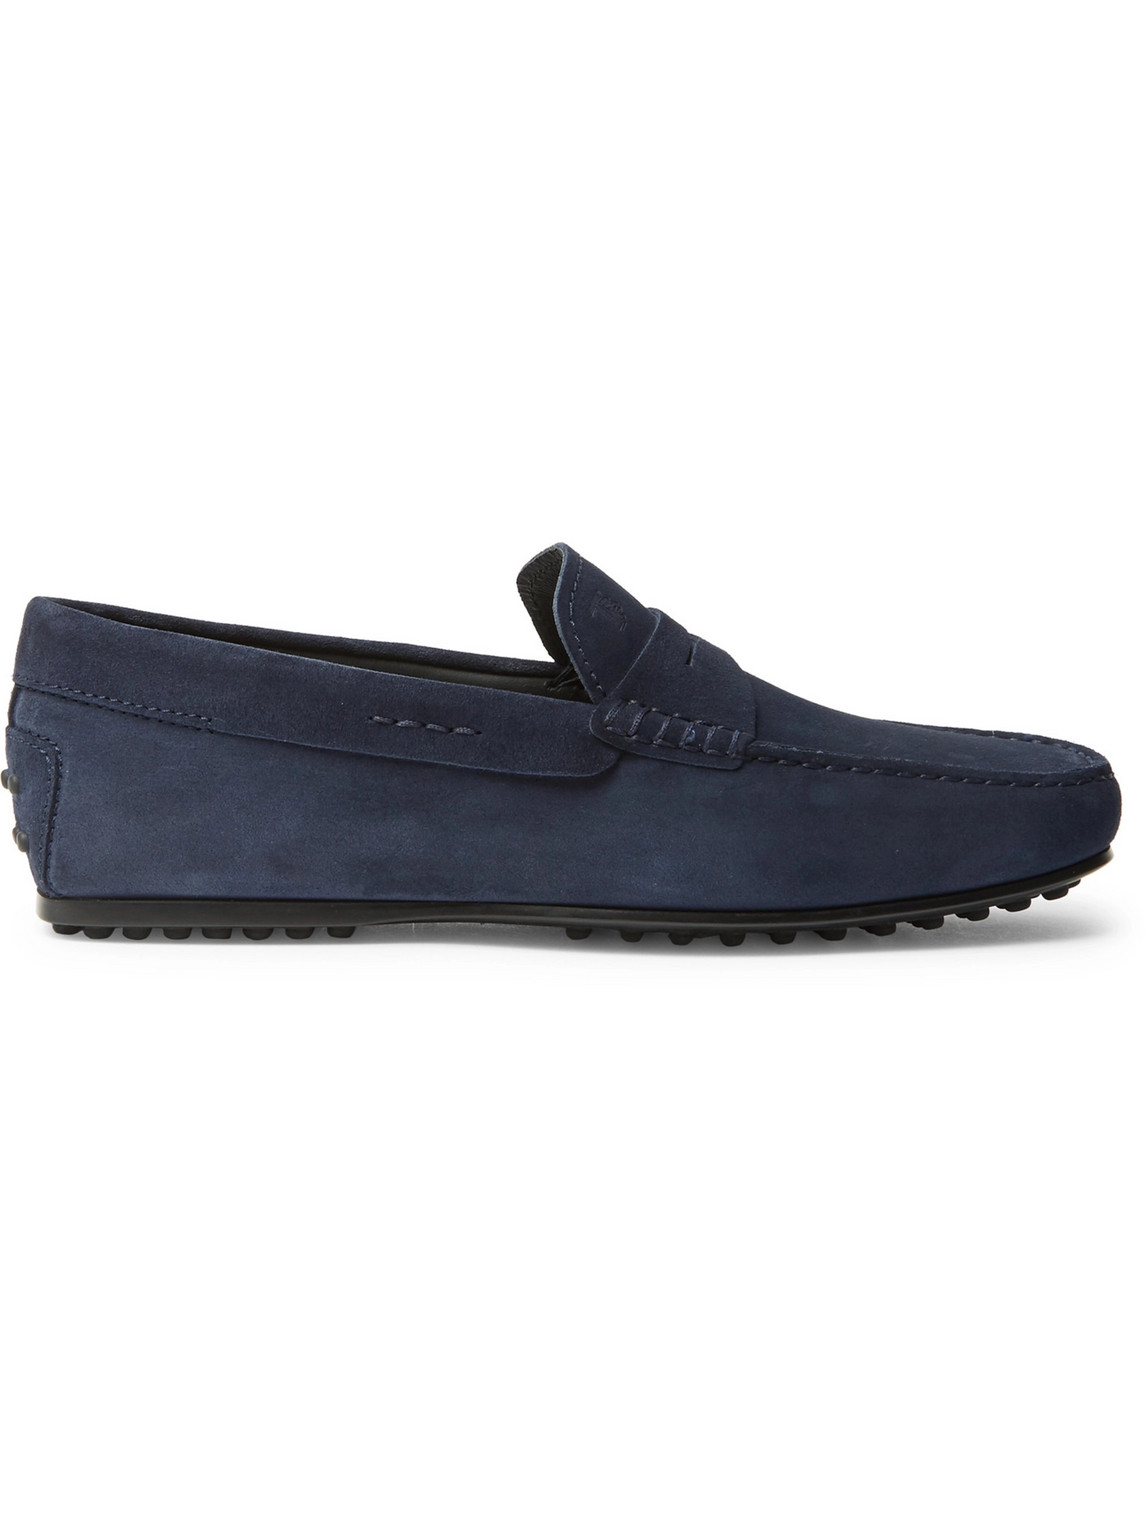 Tod's - Gommino Suede Driving Shoes - Men - Blue - UK 8.5 von Tod's